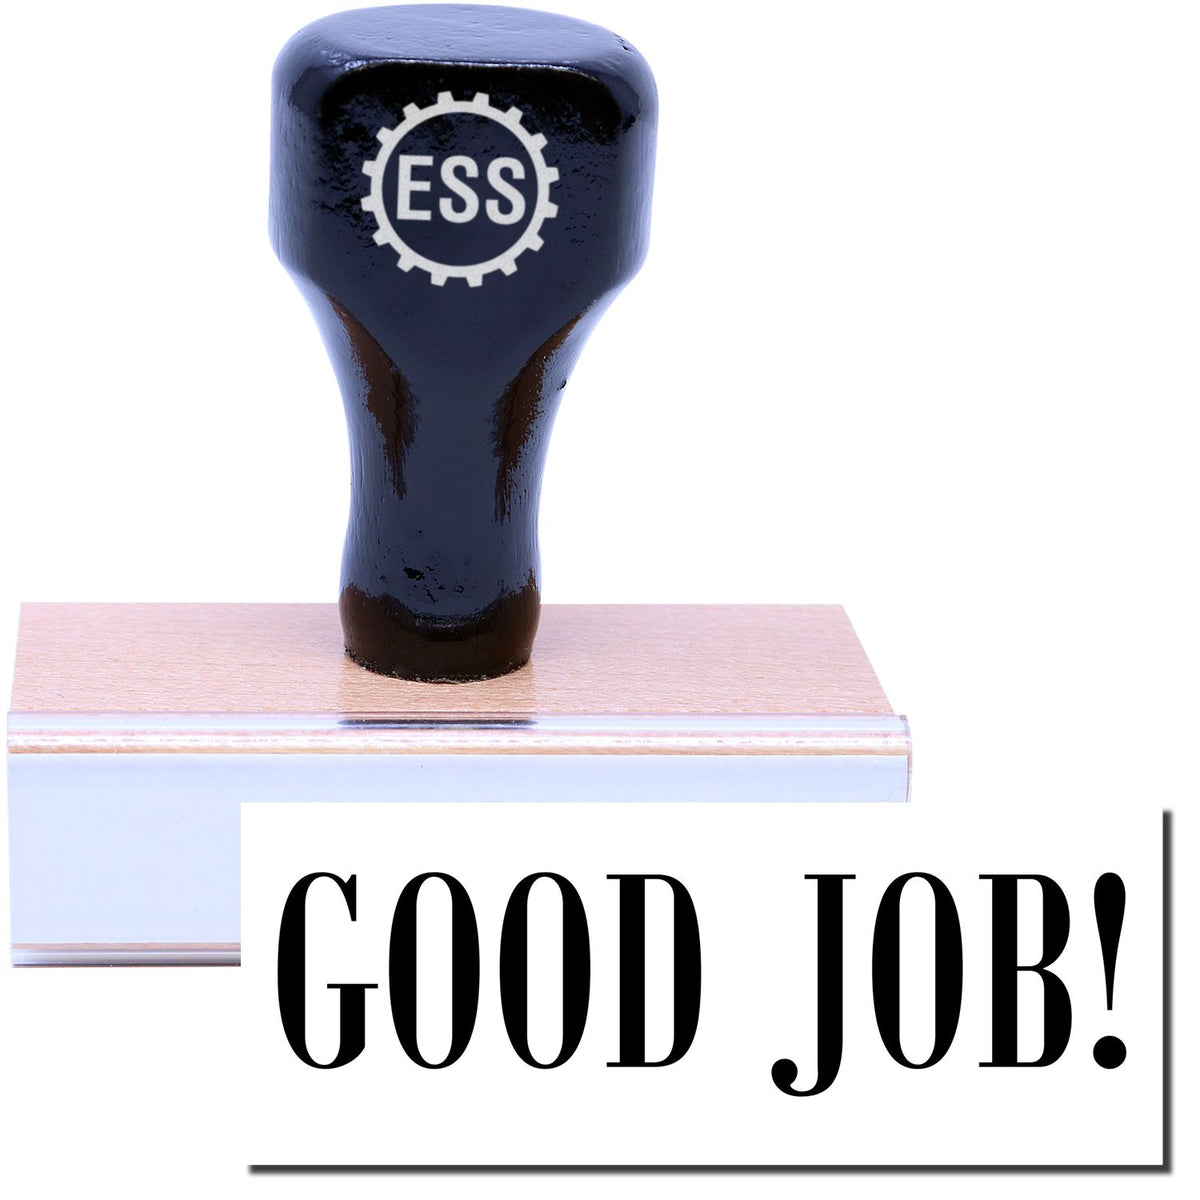 A stock office rubber stamp with a stamped image showing how the text &quot;GOOD JOB!&quot; is displayed after stamping.